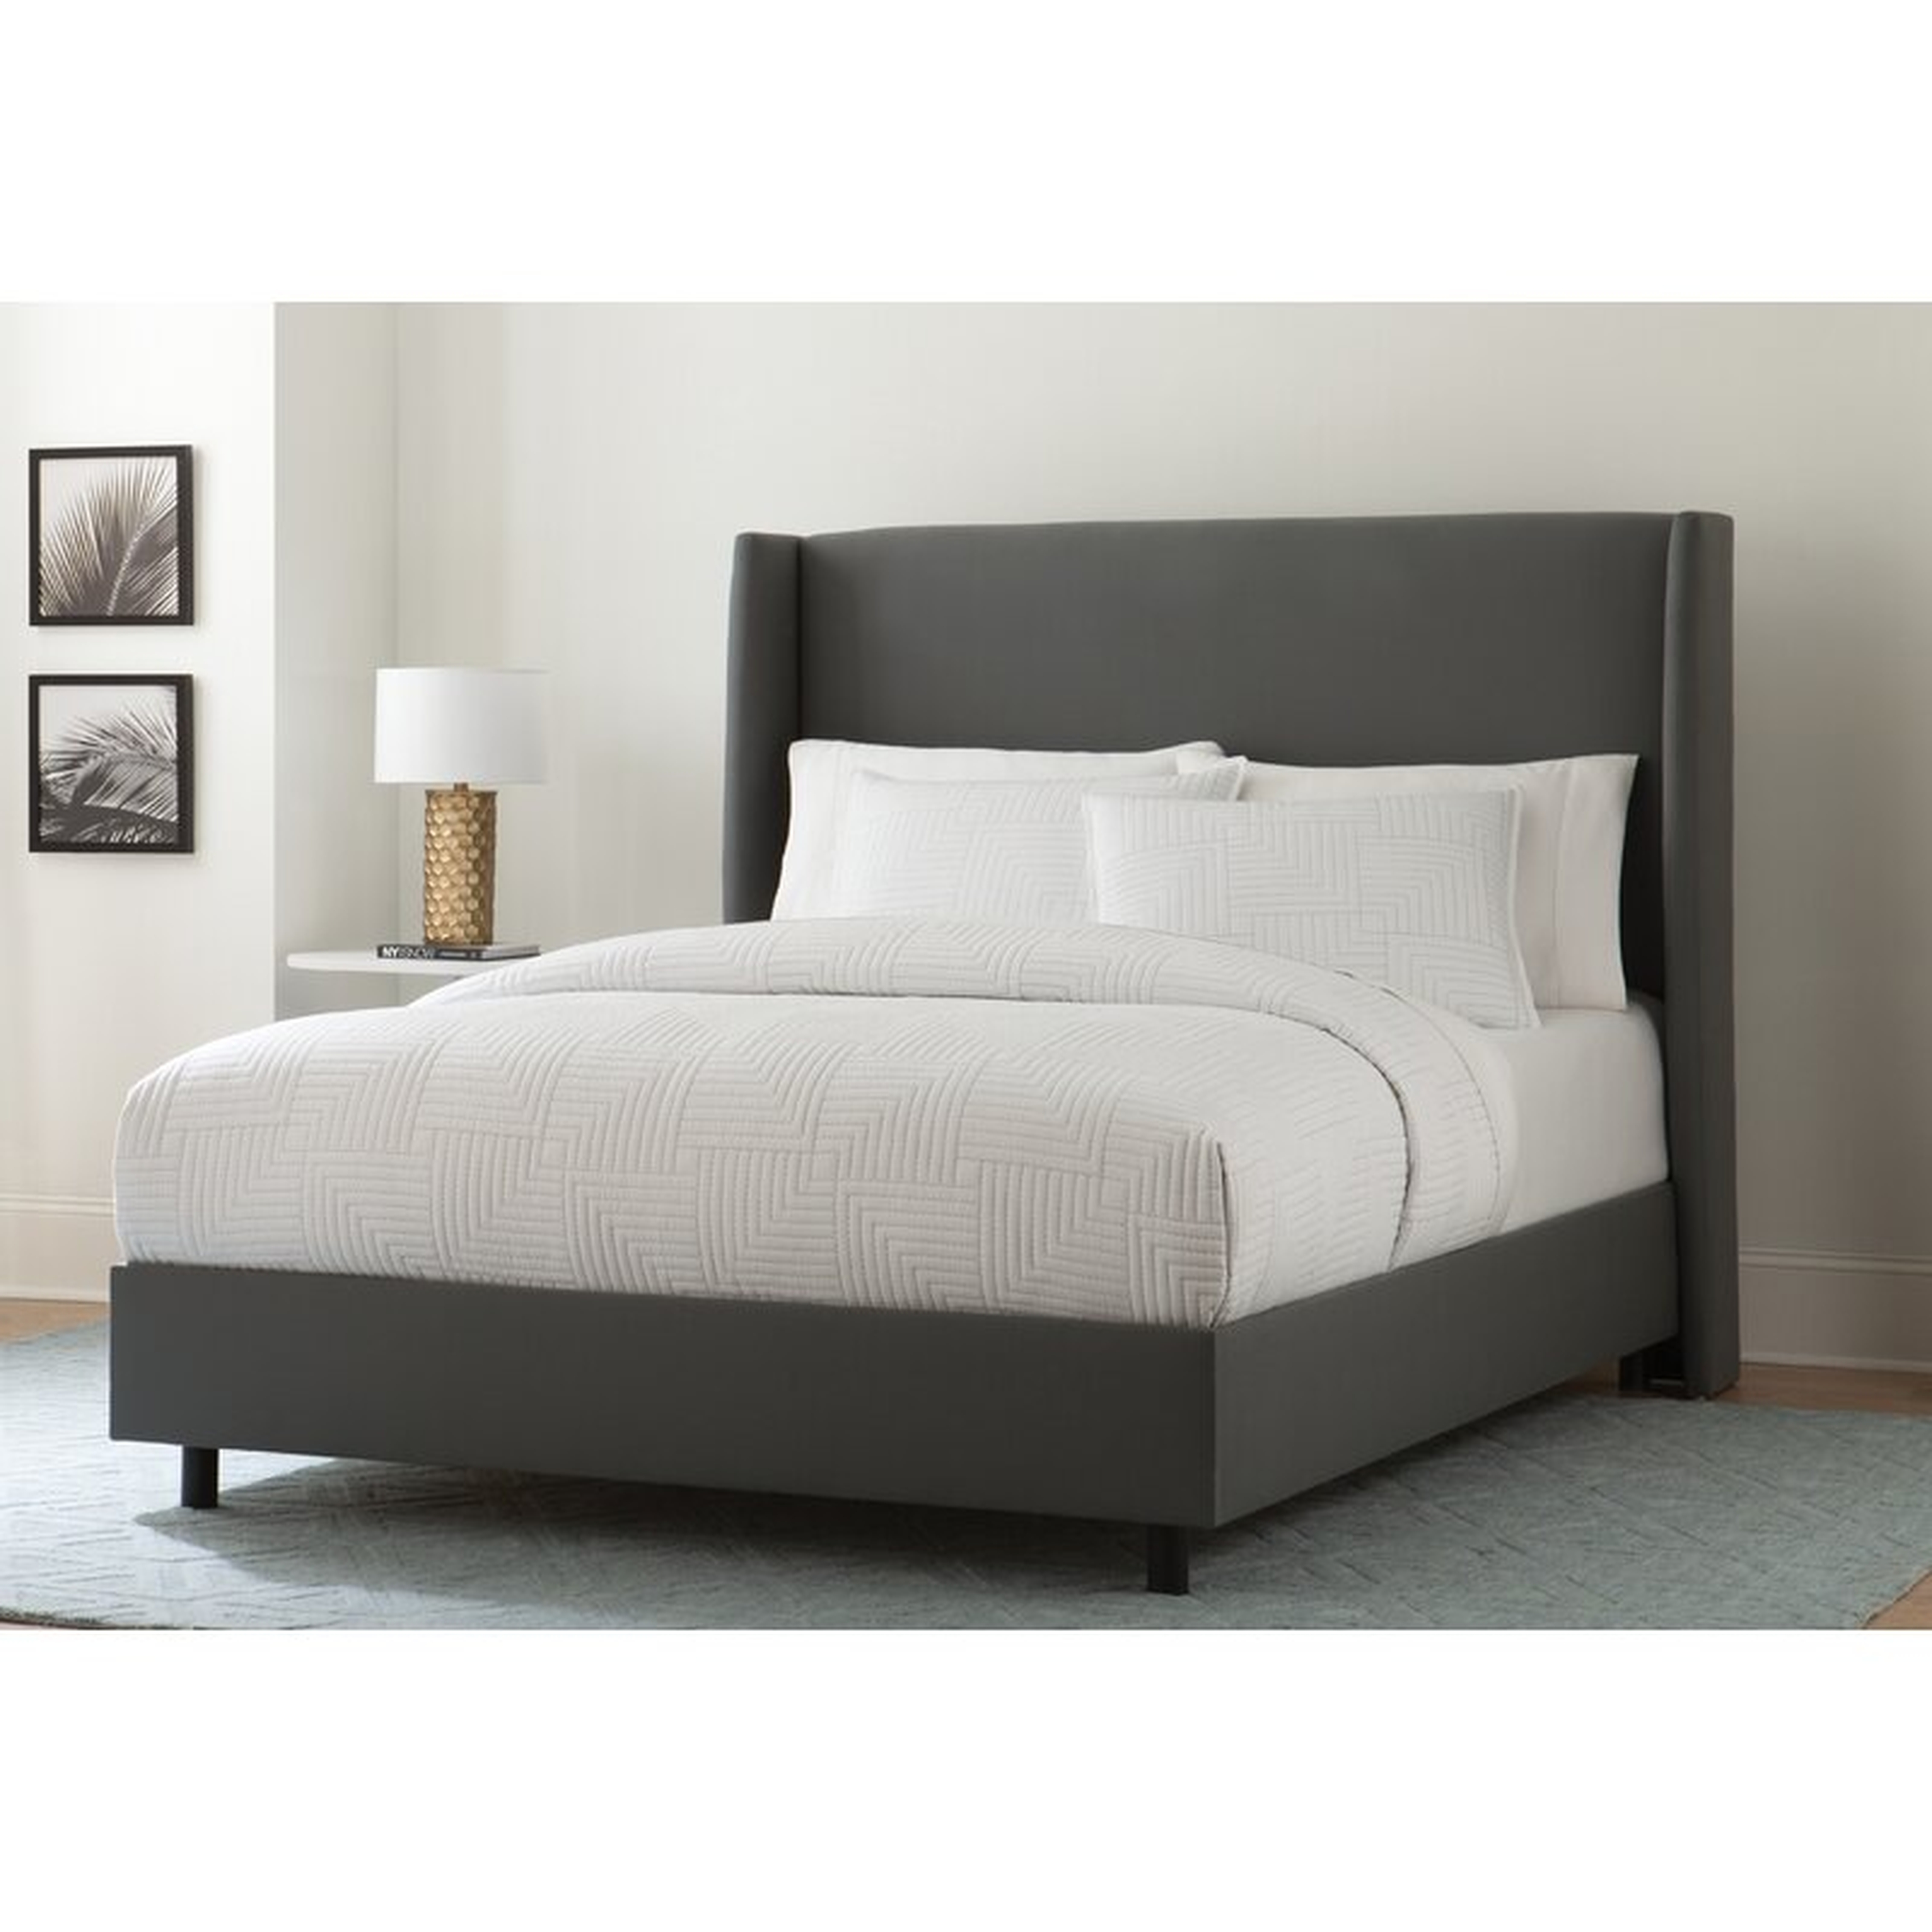 Carey Solid Wood and Upholstered Low Profile Standard Bed, Twill Gray, King - Wayfair